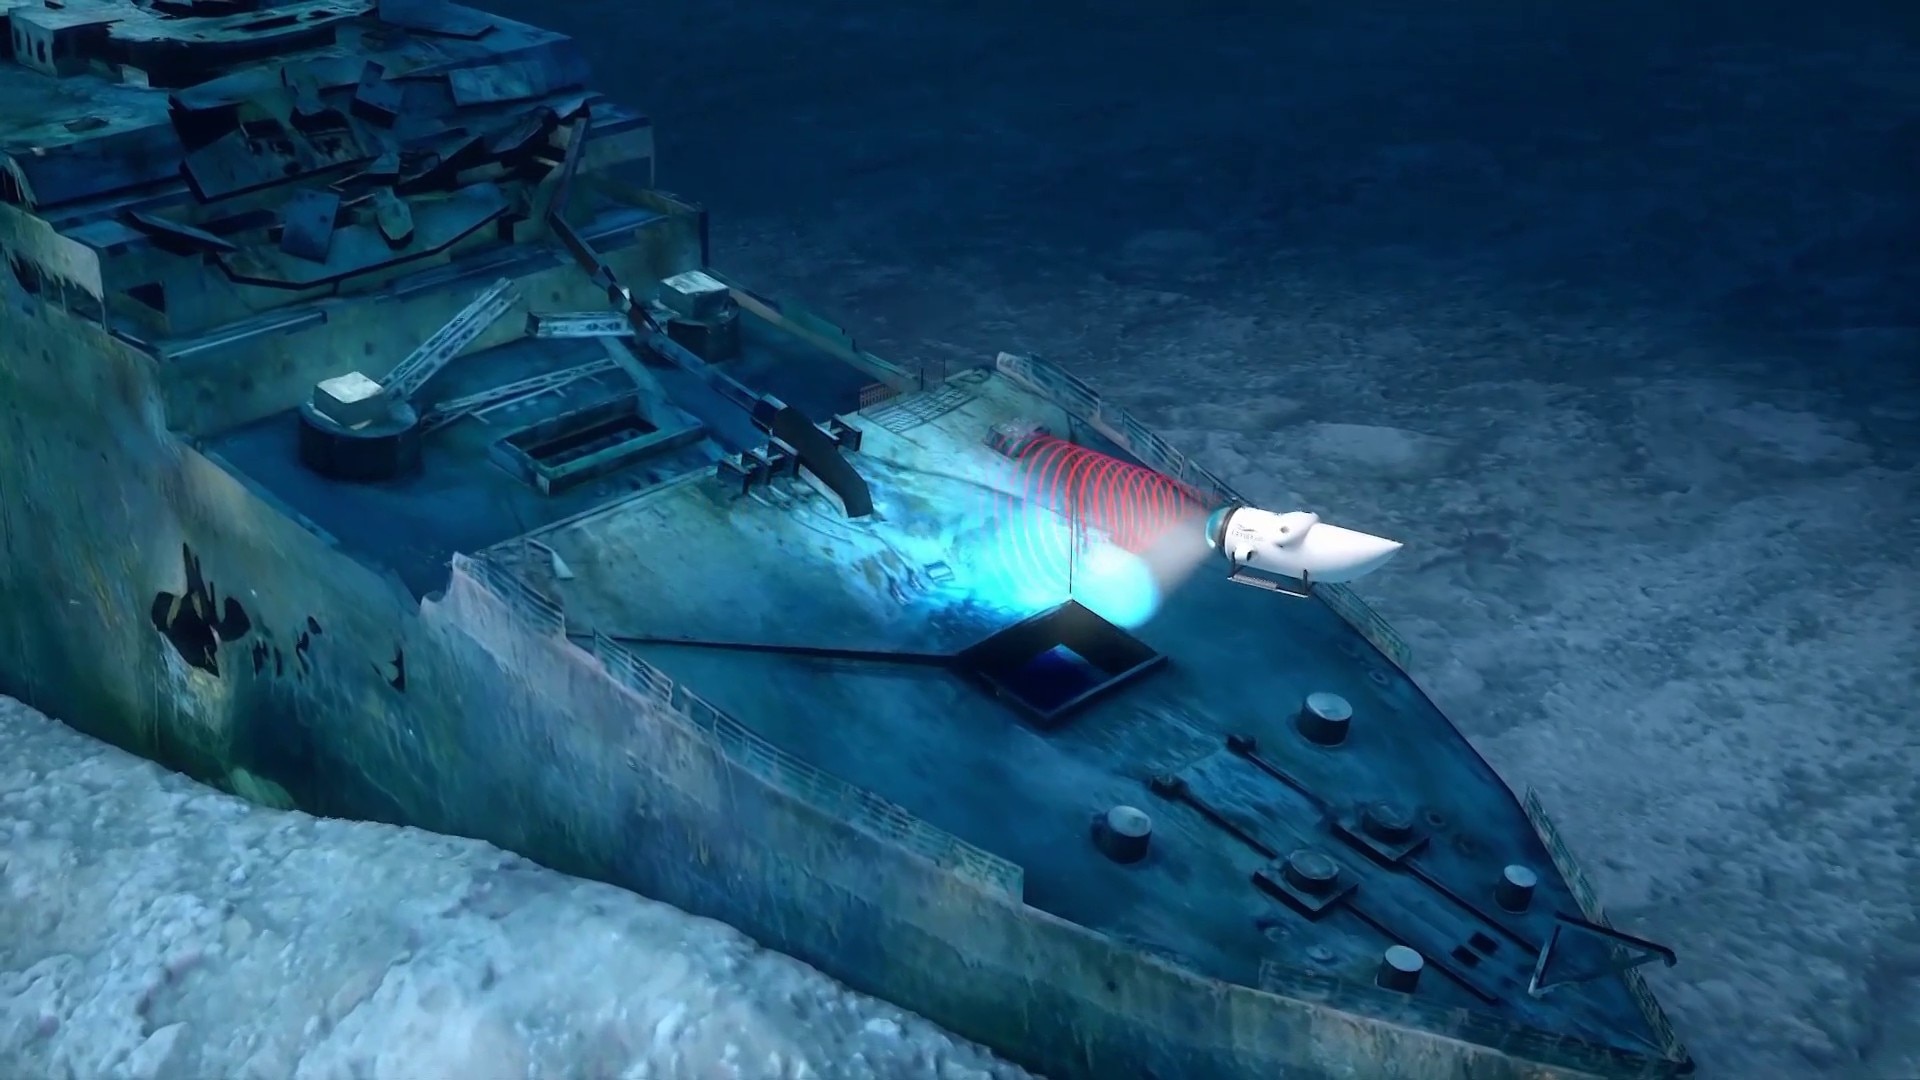 Titanic S Deep Sea Expedition Shows New Images Of The Wreck Including ...